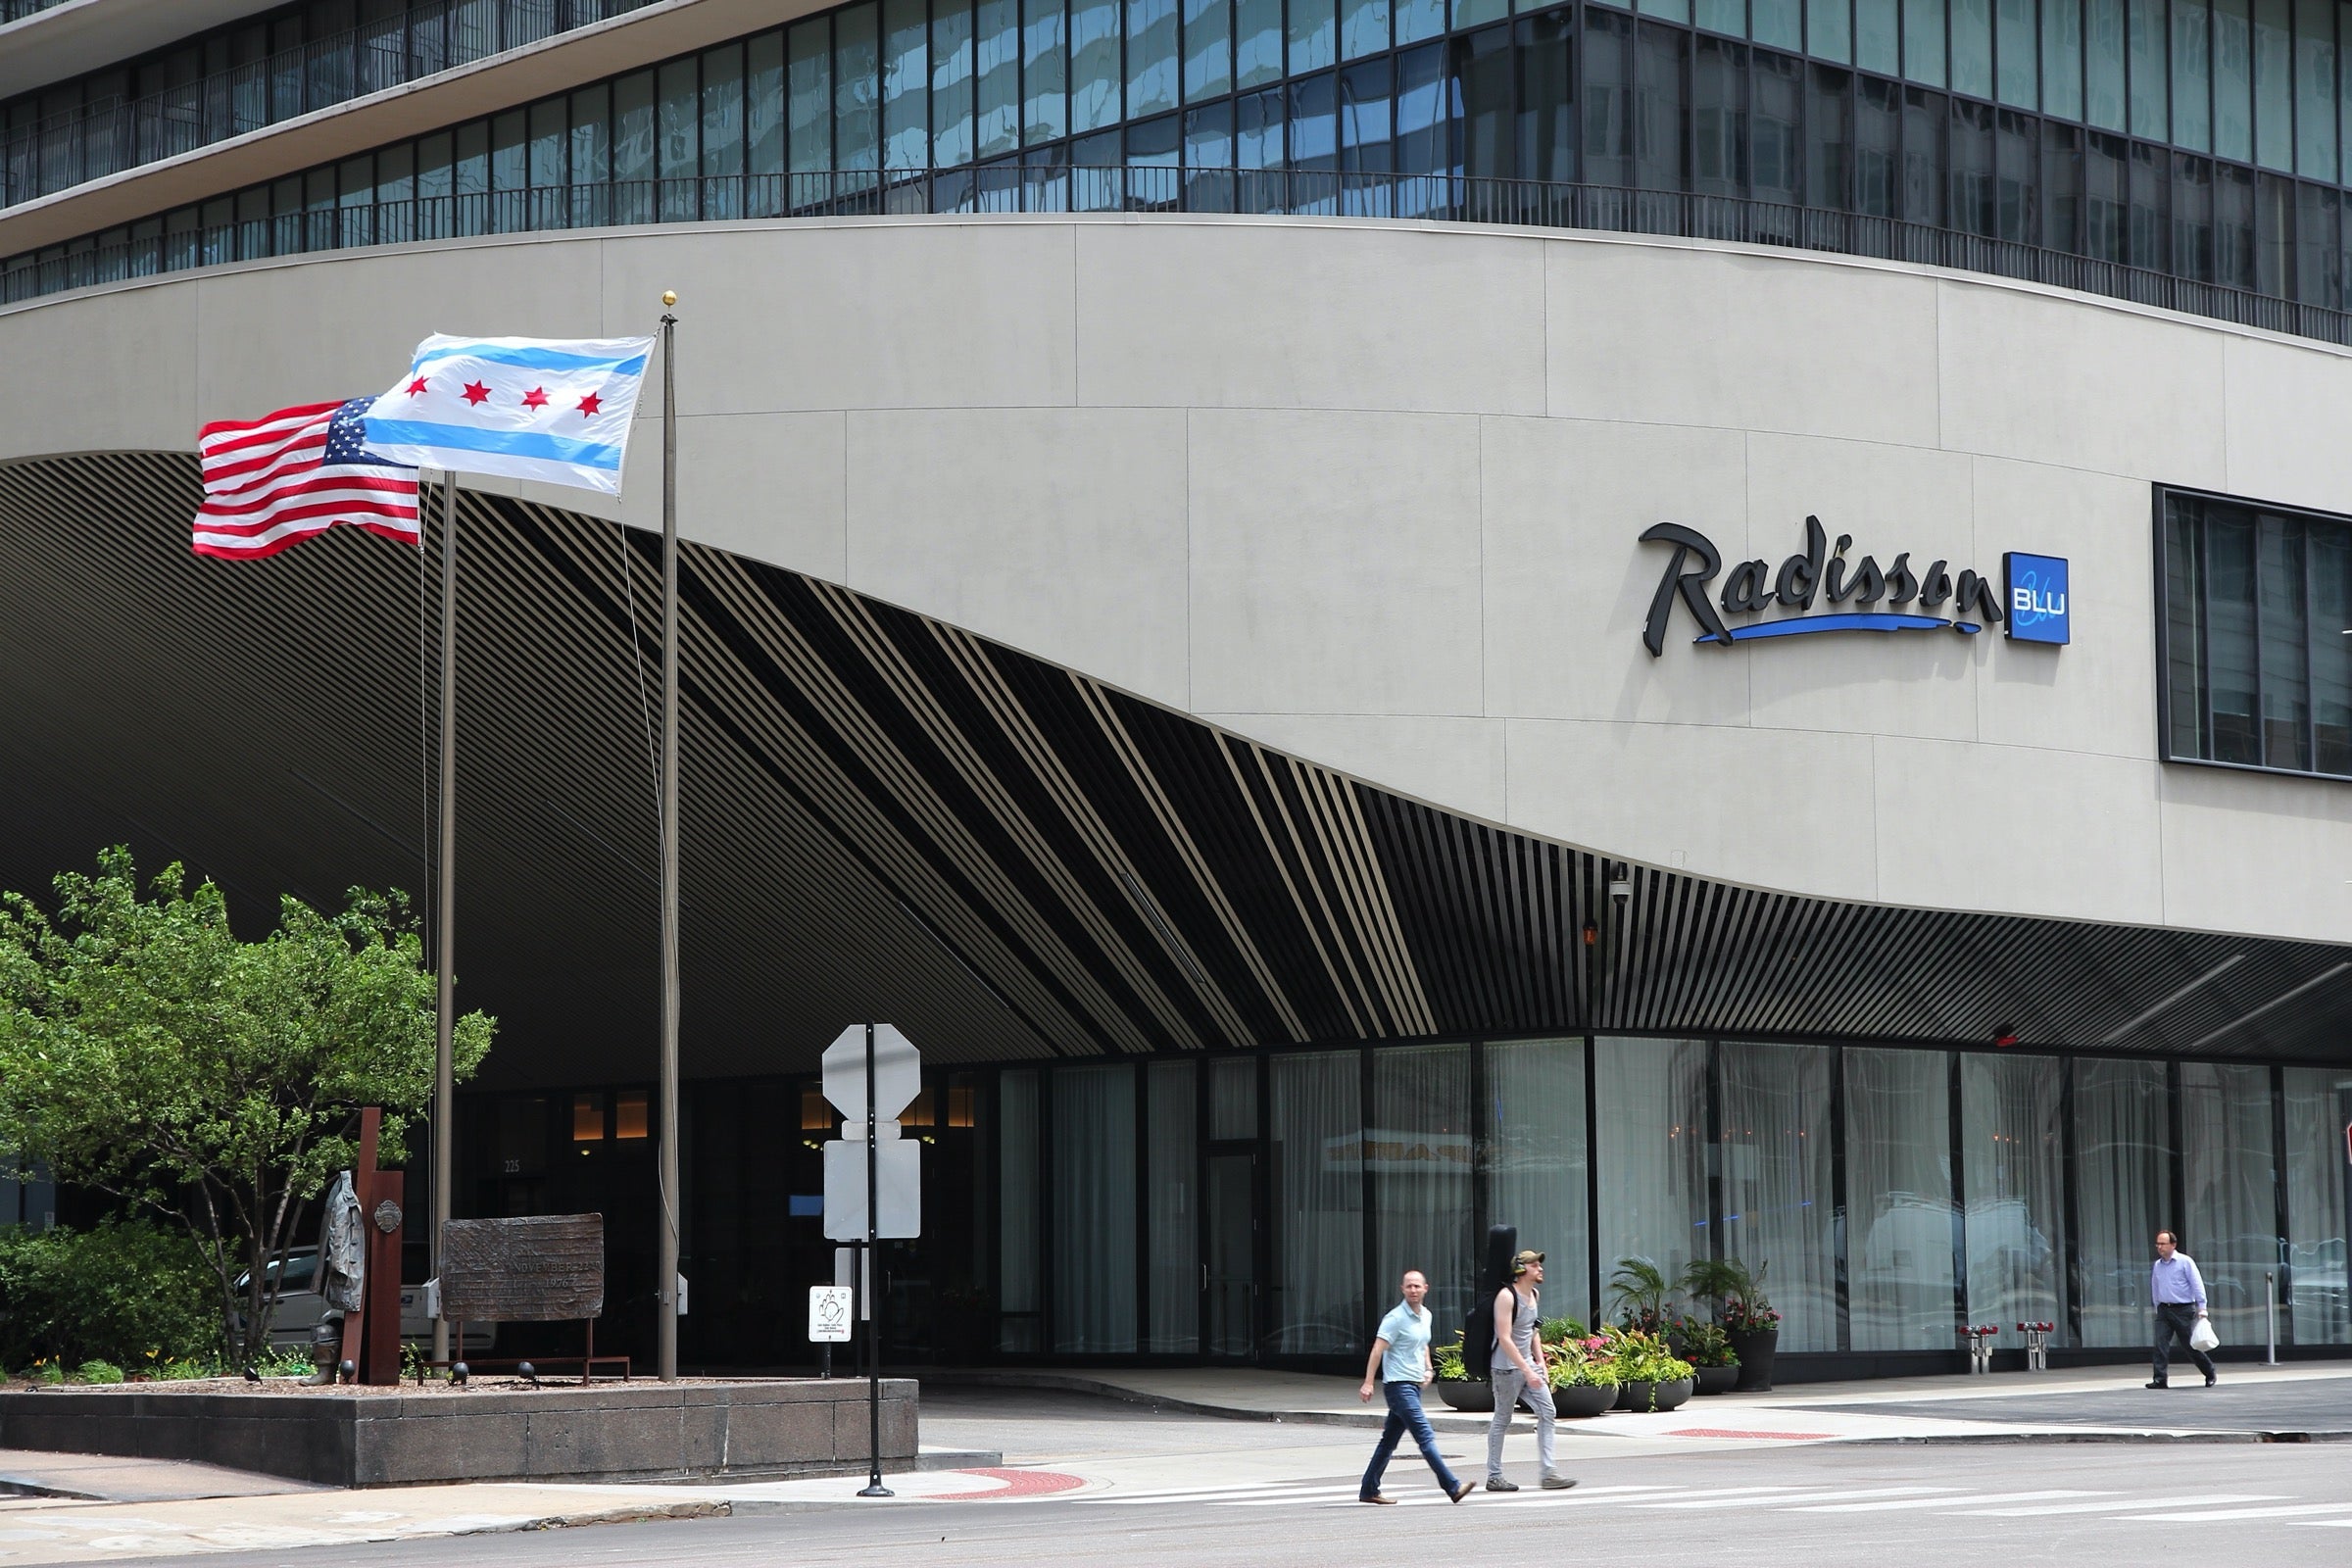 Radisson to launch a separate loyalty program for travelers in the Americas